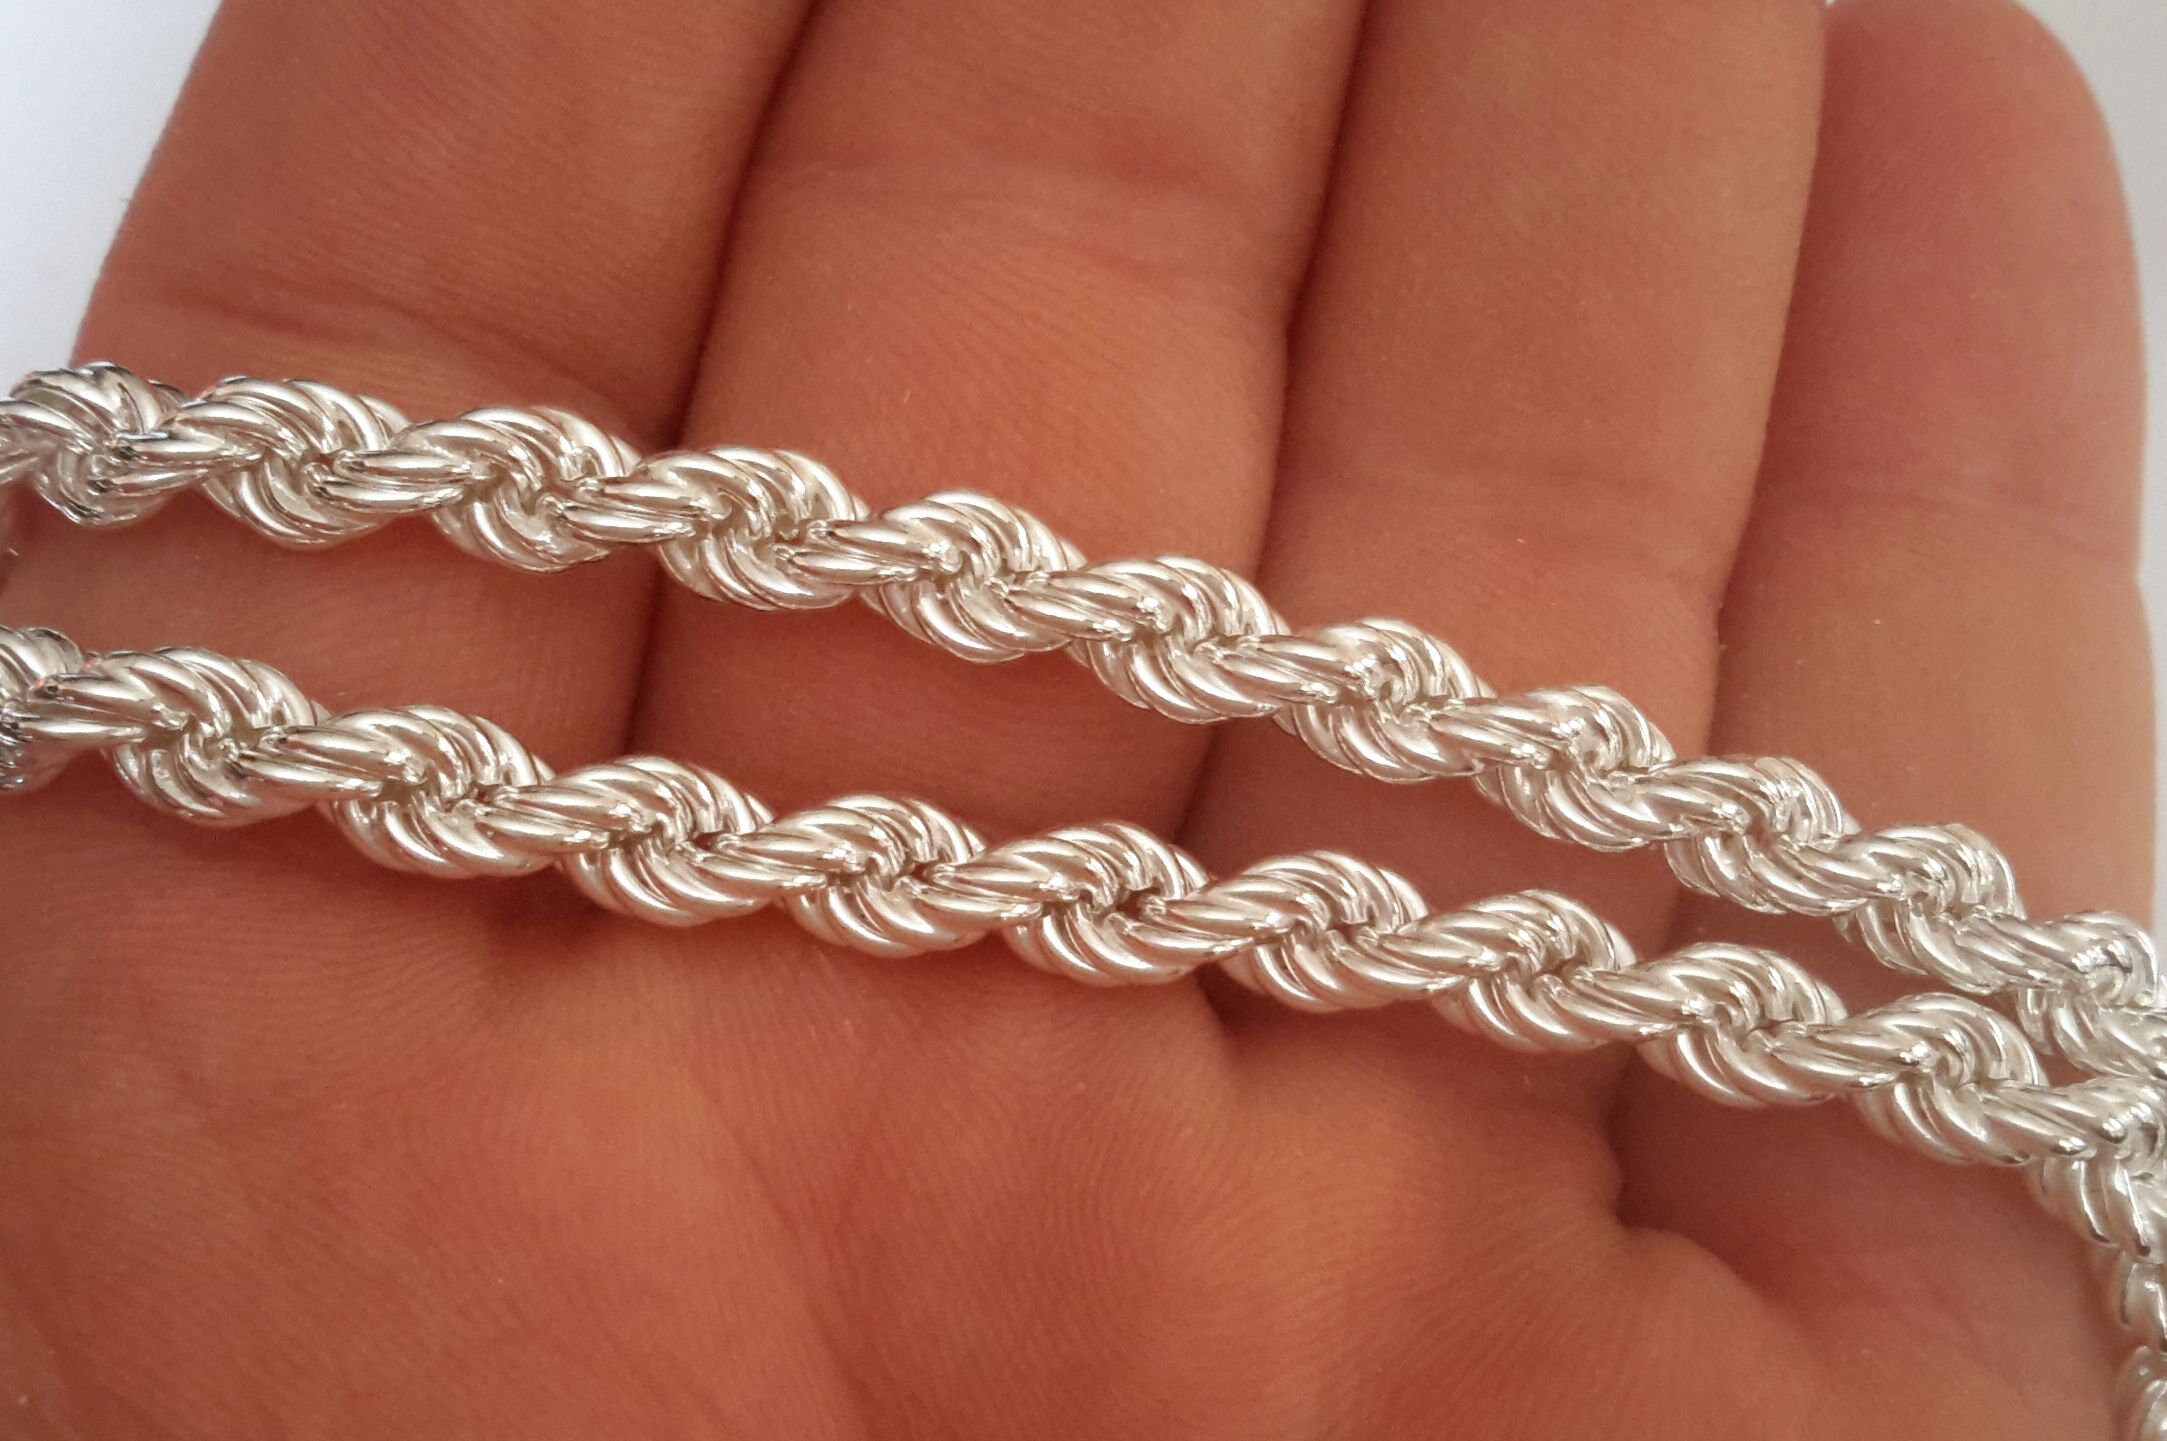 1FT 9x5mm 925 Sterling Silver Chain Bulk, Smooth Rectangle Hollow Link  Chain, Necklace or Bracelet Jewelry Supply, Chain by Foot. V137SS 